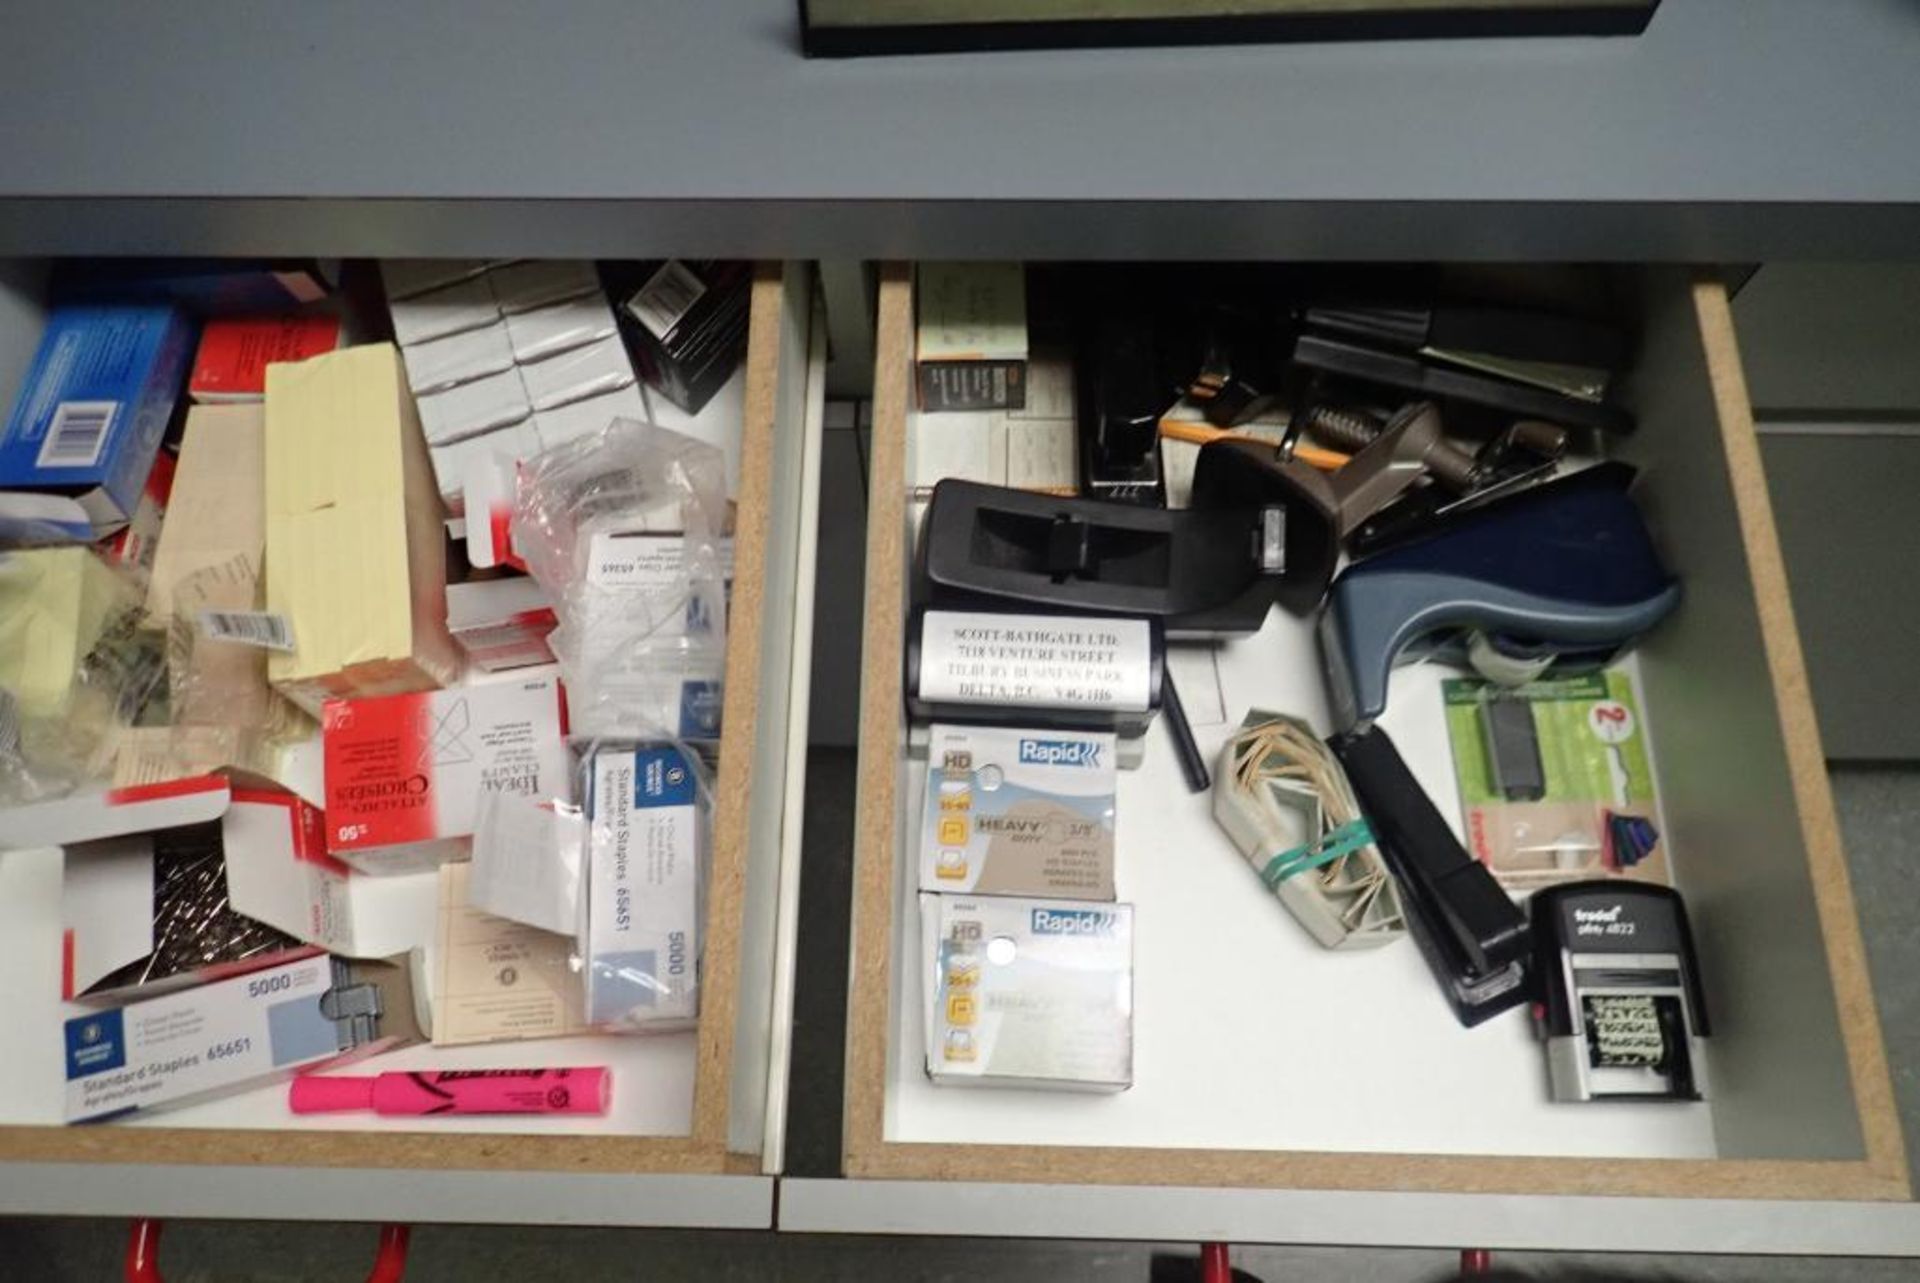 Contents of Copier Room. - Image 11 of 14